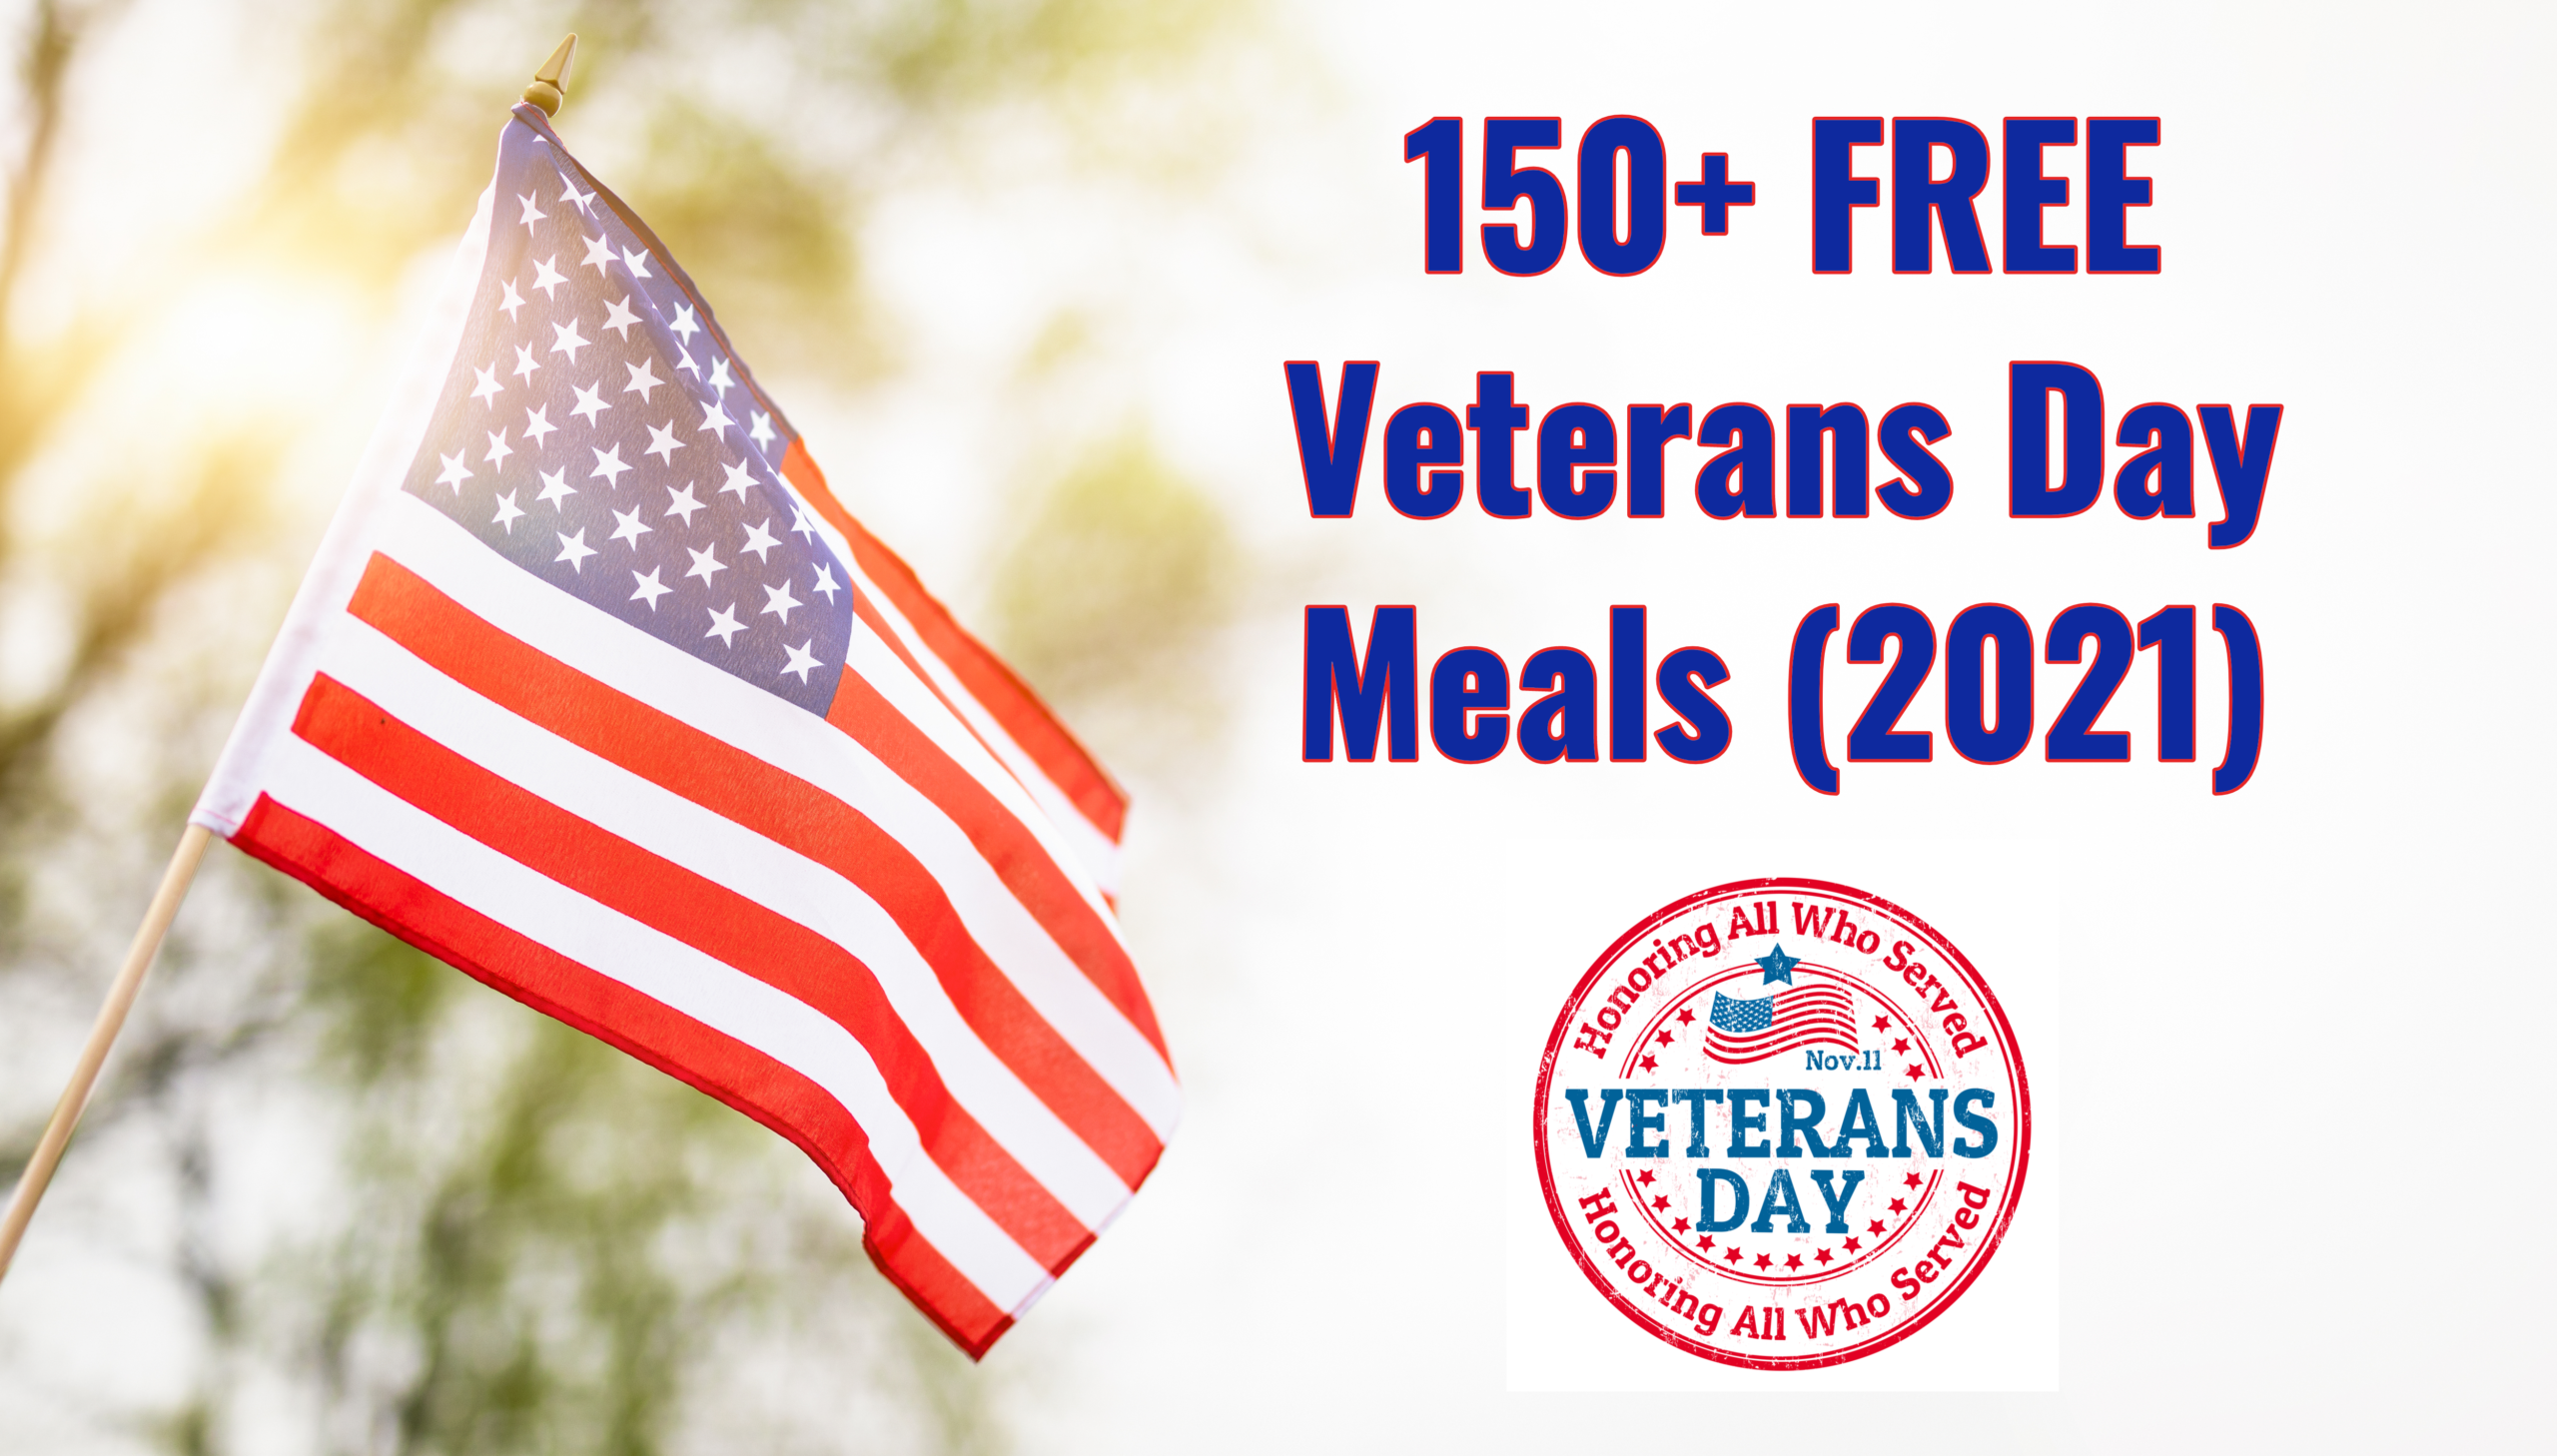 150+ Top Restaurants Offering Veterans Day Free Meals This Year: The Ultimate Guide (2021) - VA Claims Insider